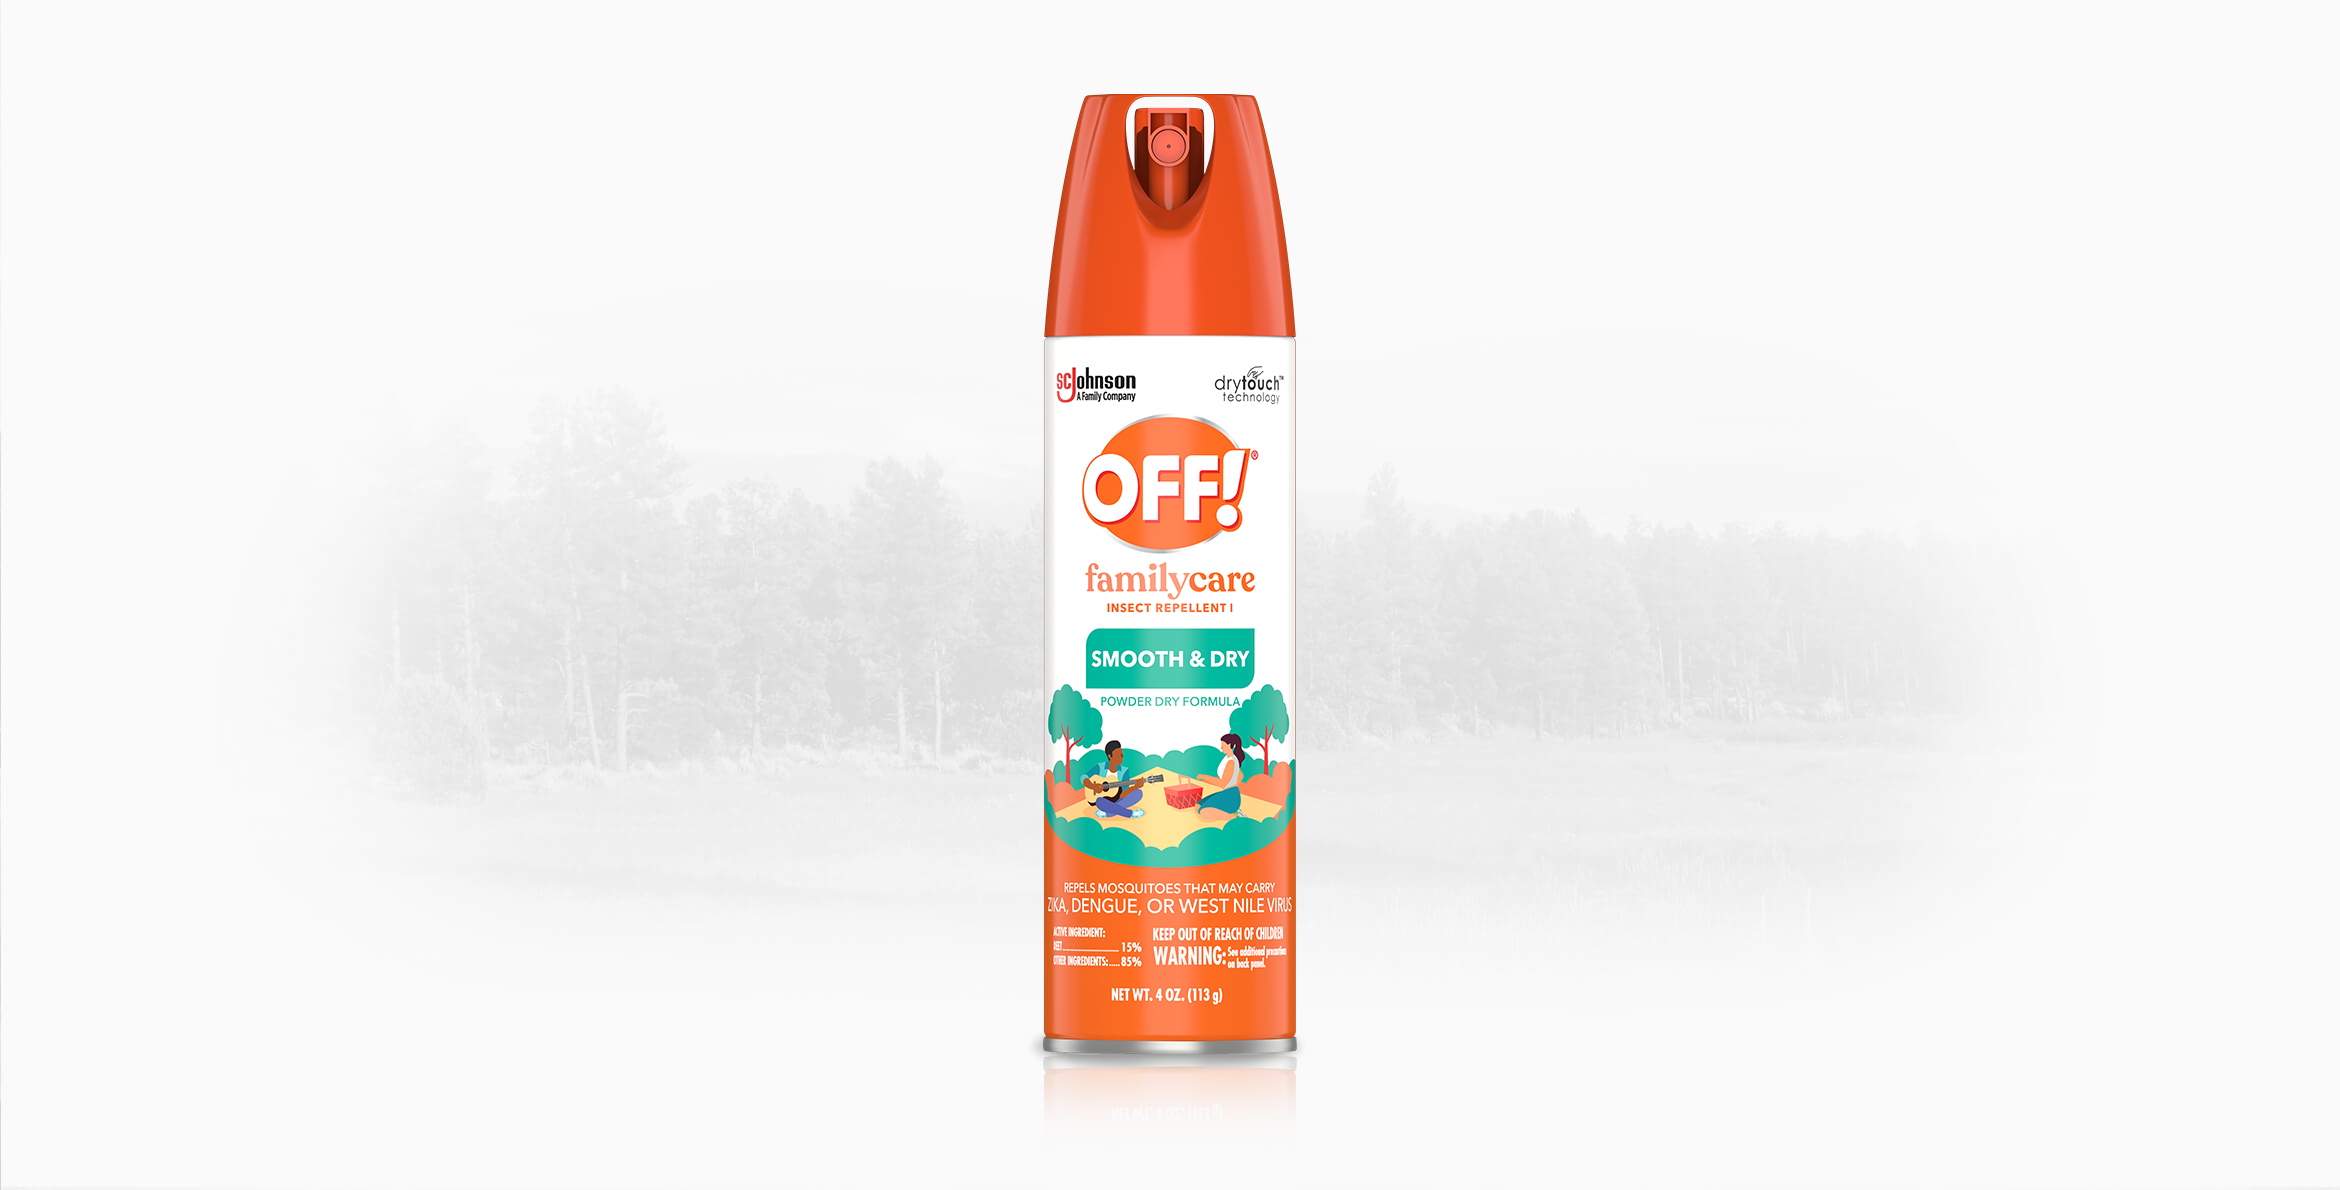 OFF!® FamilyCare Insect Repellent X (Smooth & Dry)